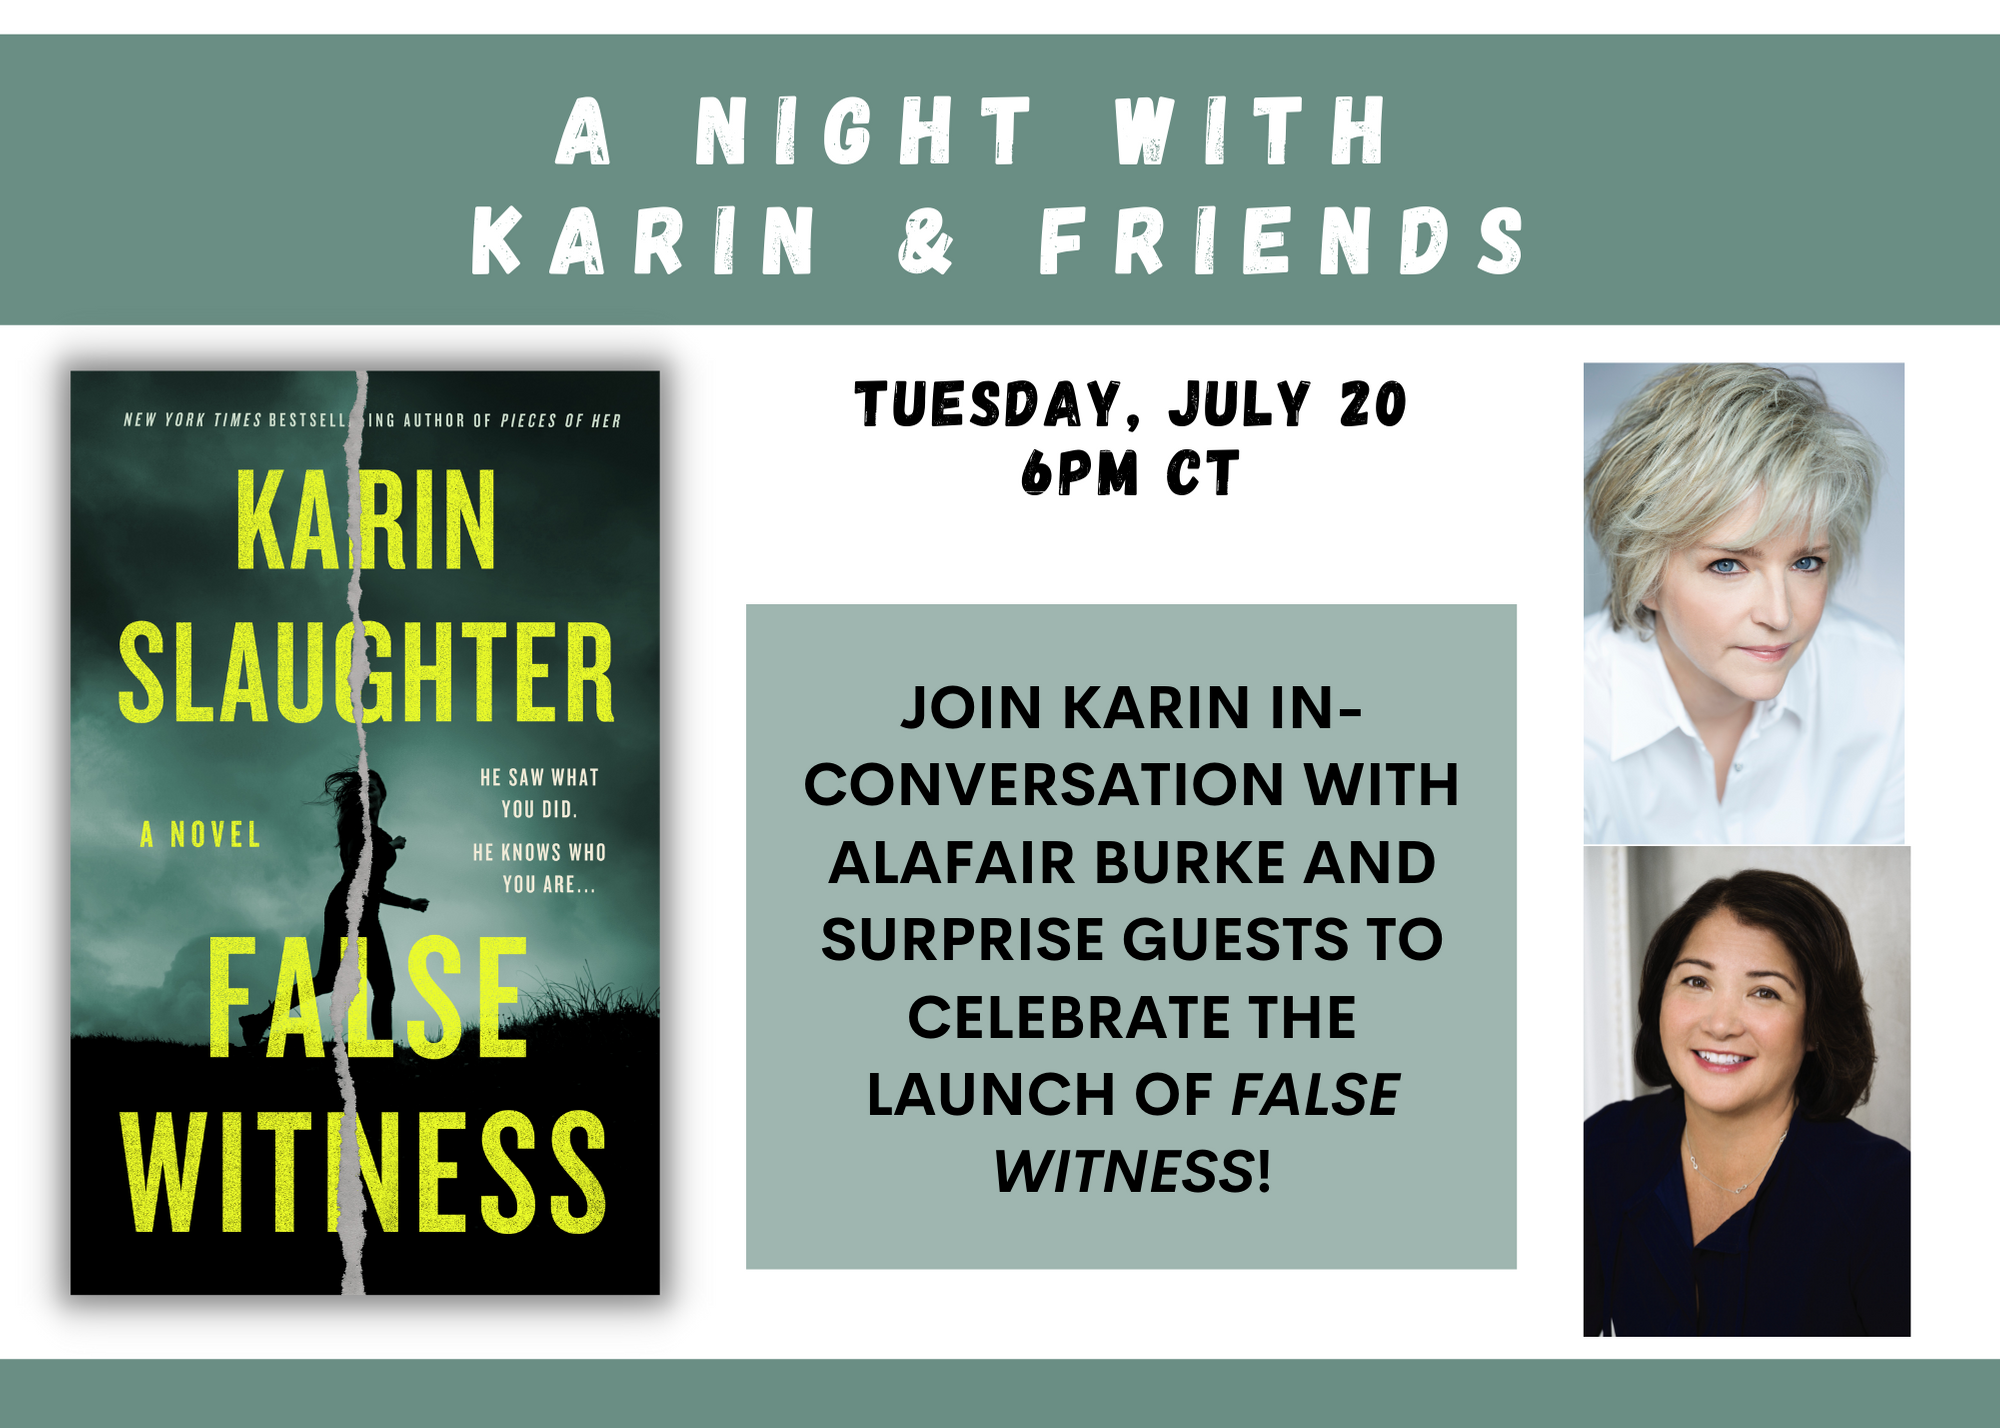 Virtual event with Karin Slaughter/False Witness